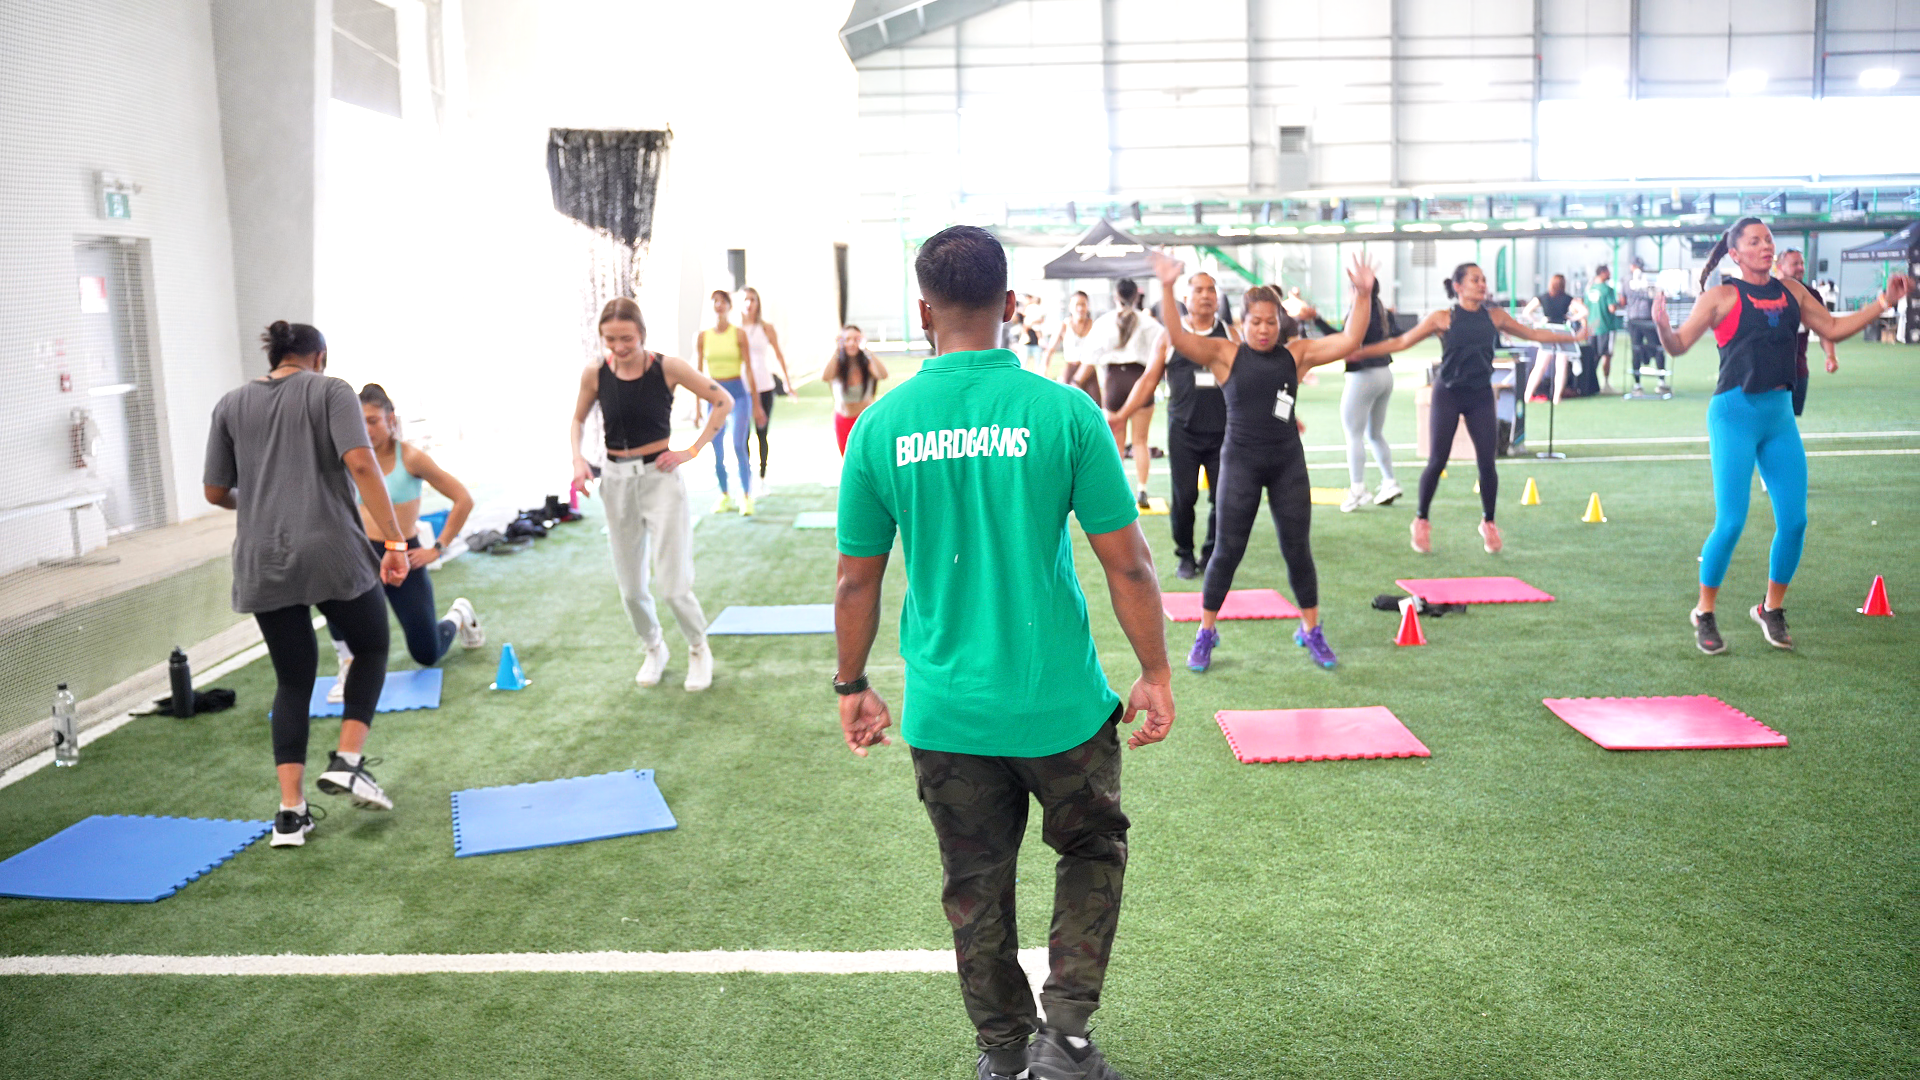 Revolutionize Your Fitness Classes: Innovative Strategies for Group Instructors